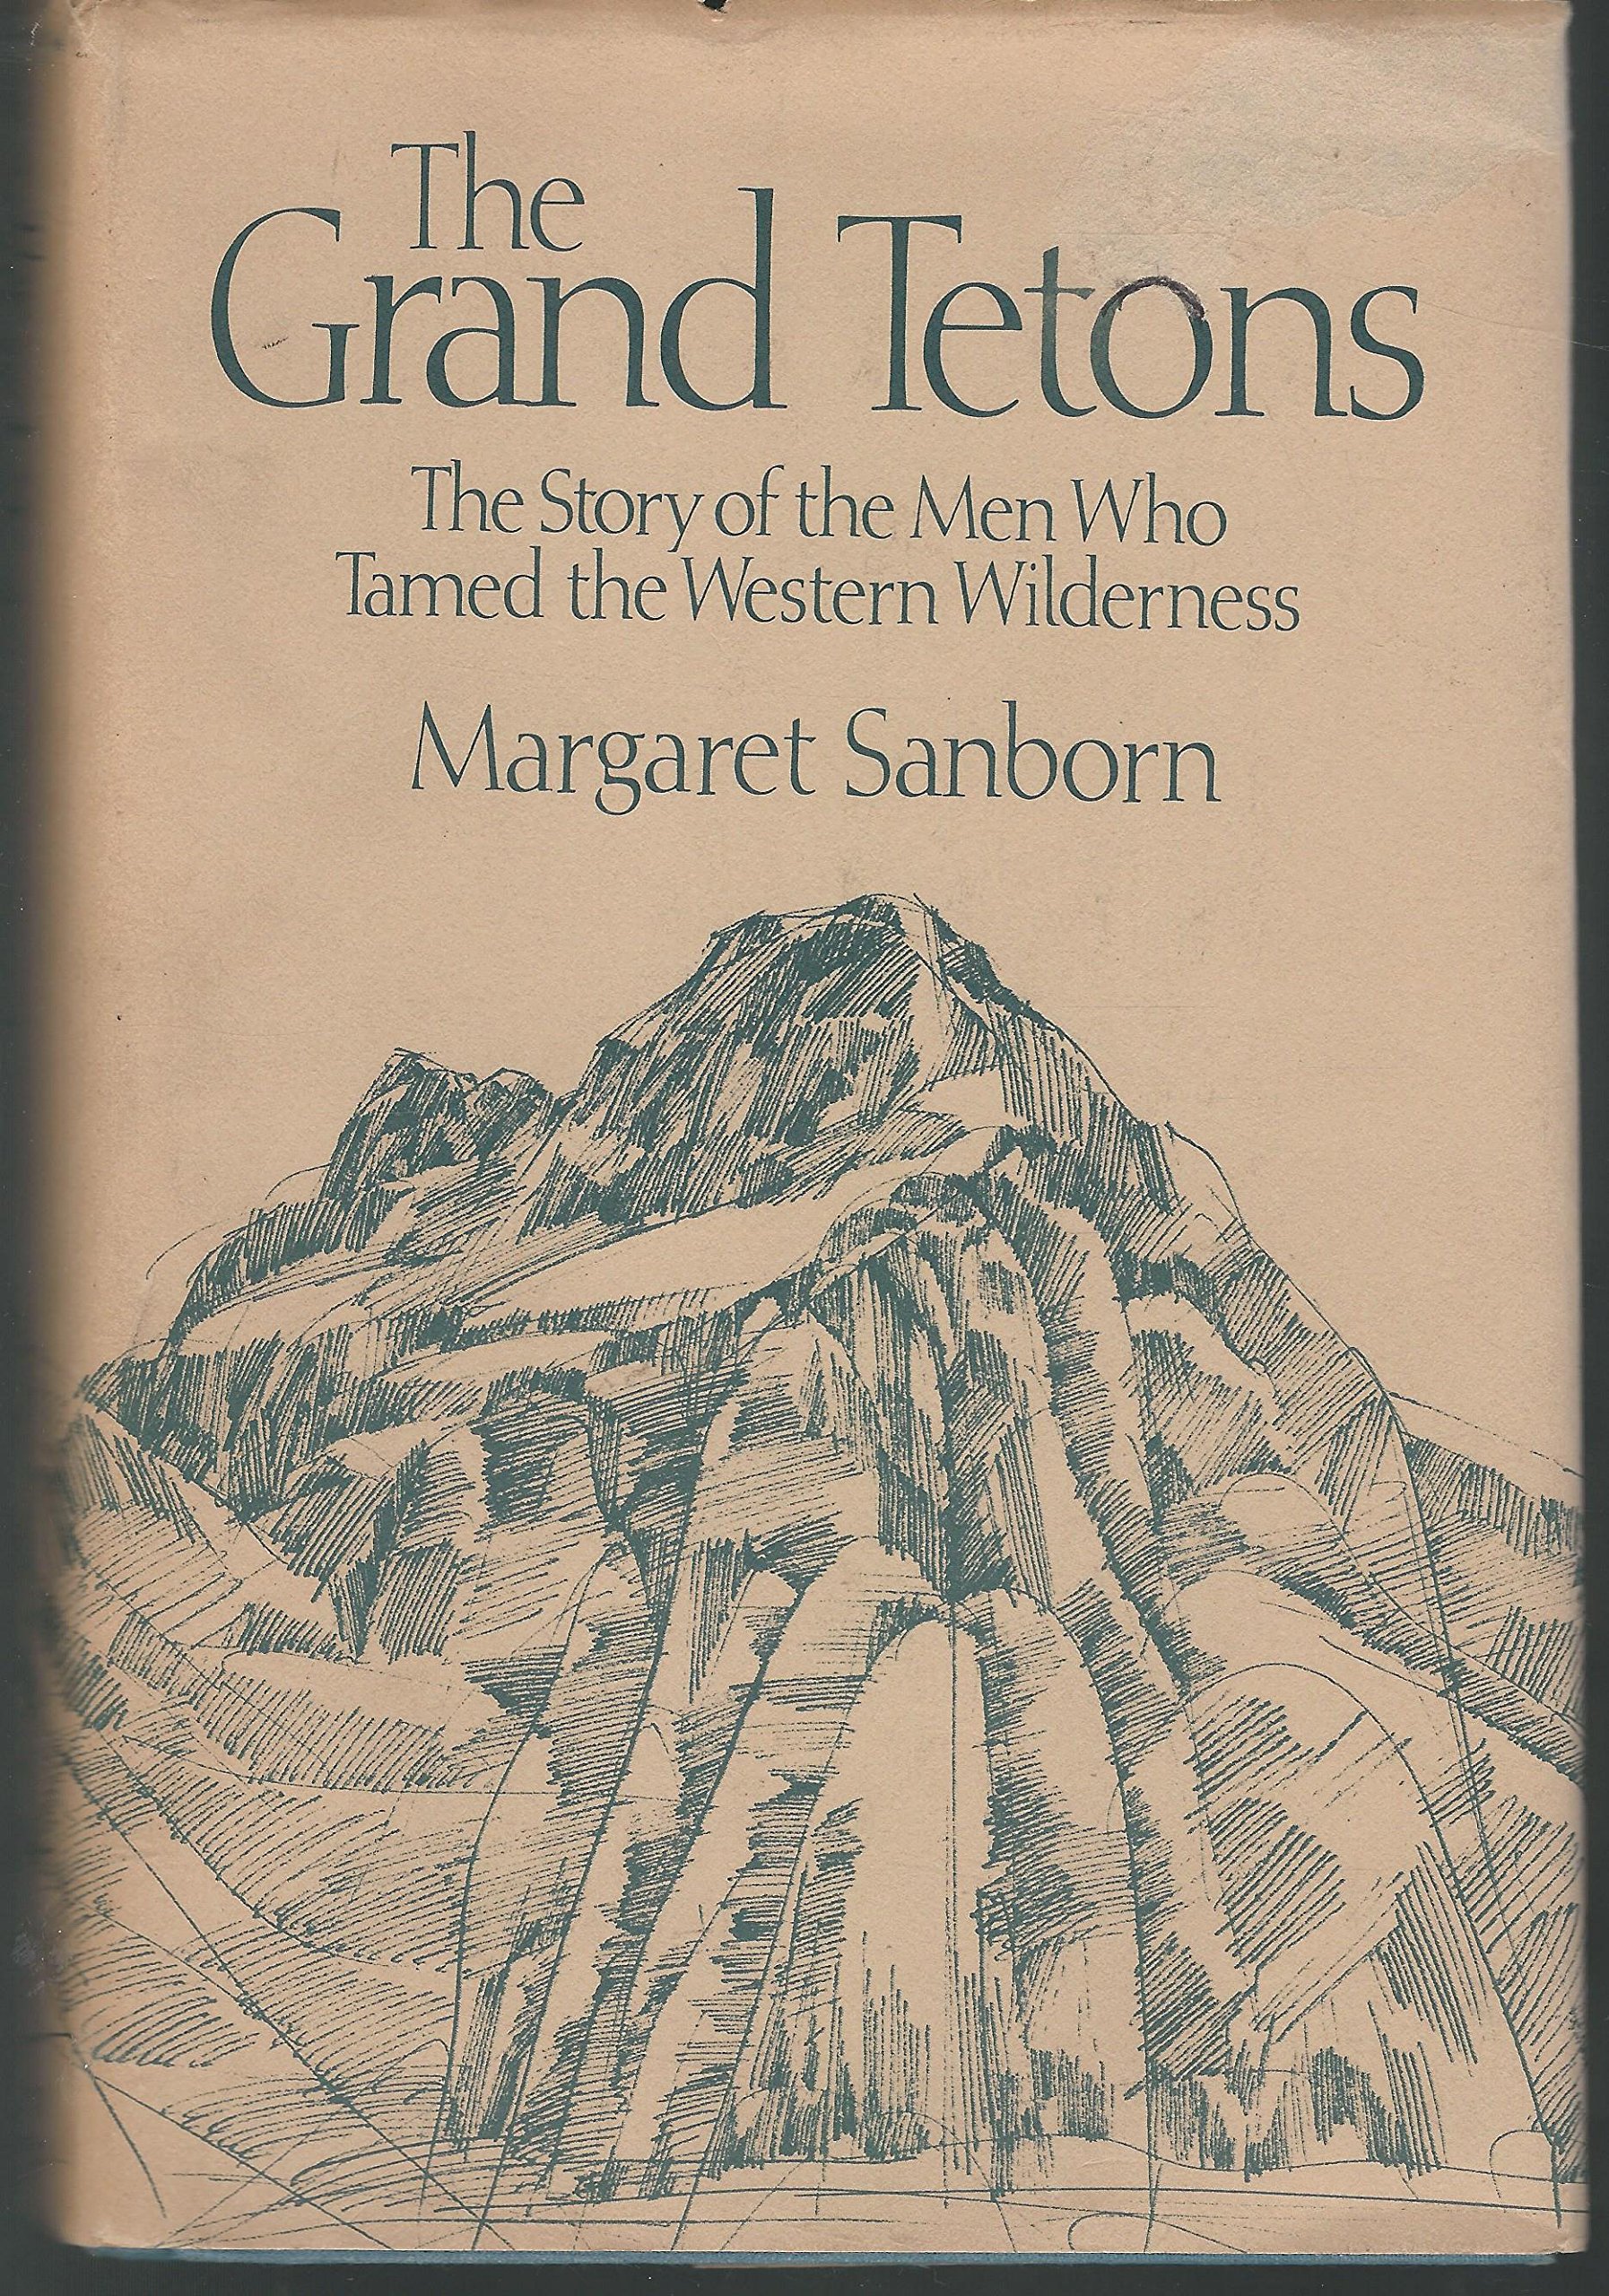 The Grand Tetons: The story of the men who tamed the western wilderness (book cover)